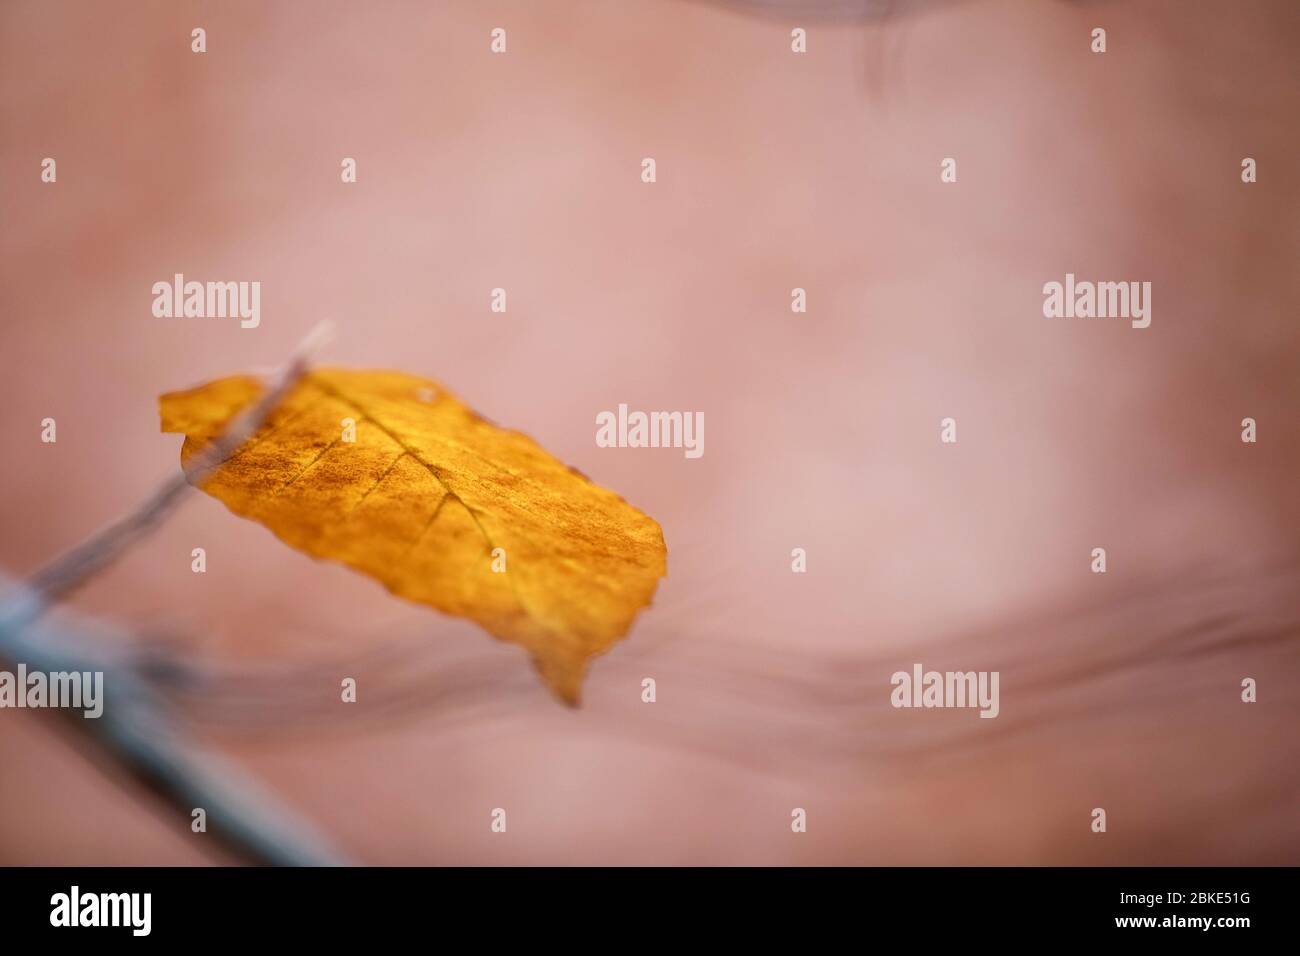 ocher colored autumn leaf in front of blurry pinkish background Stock Photo